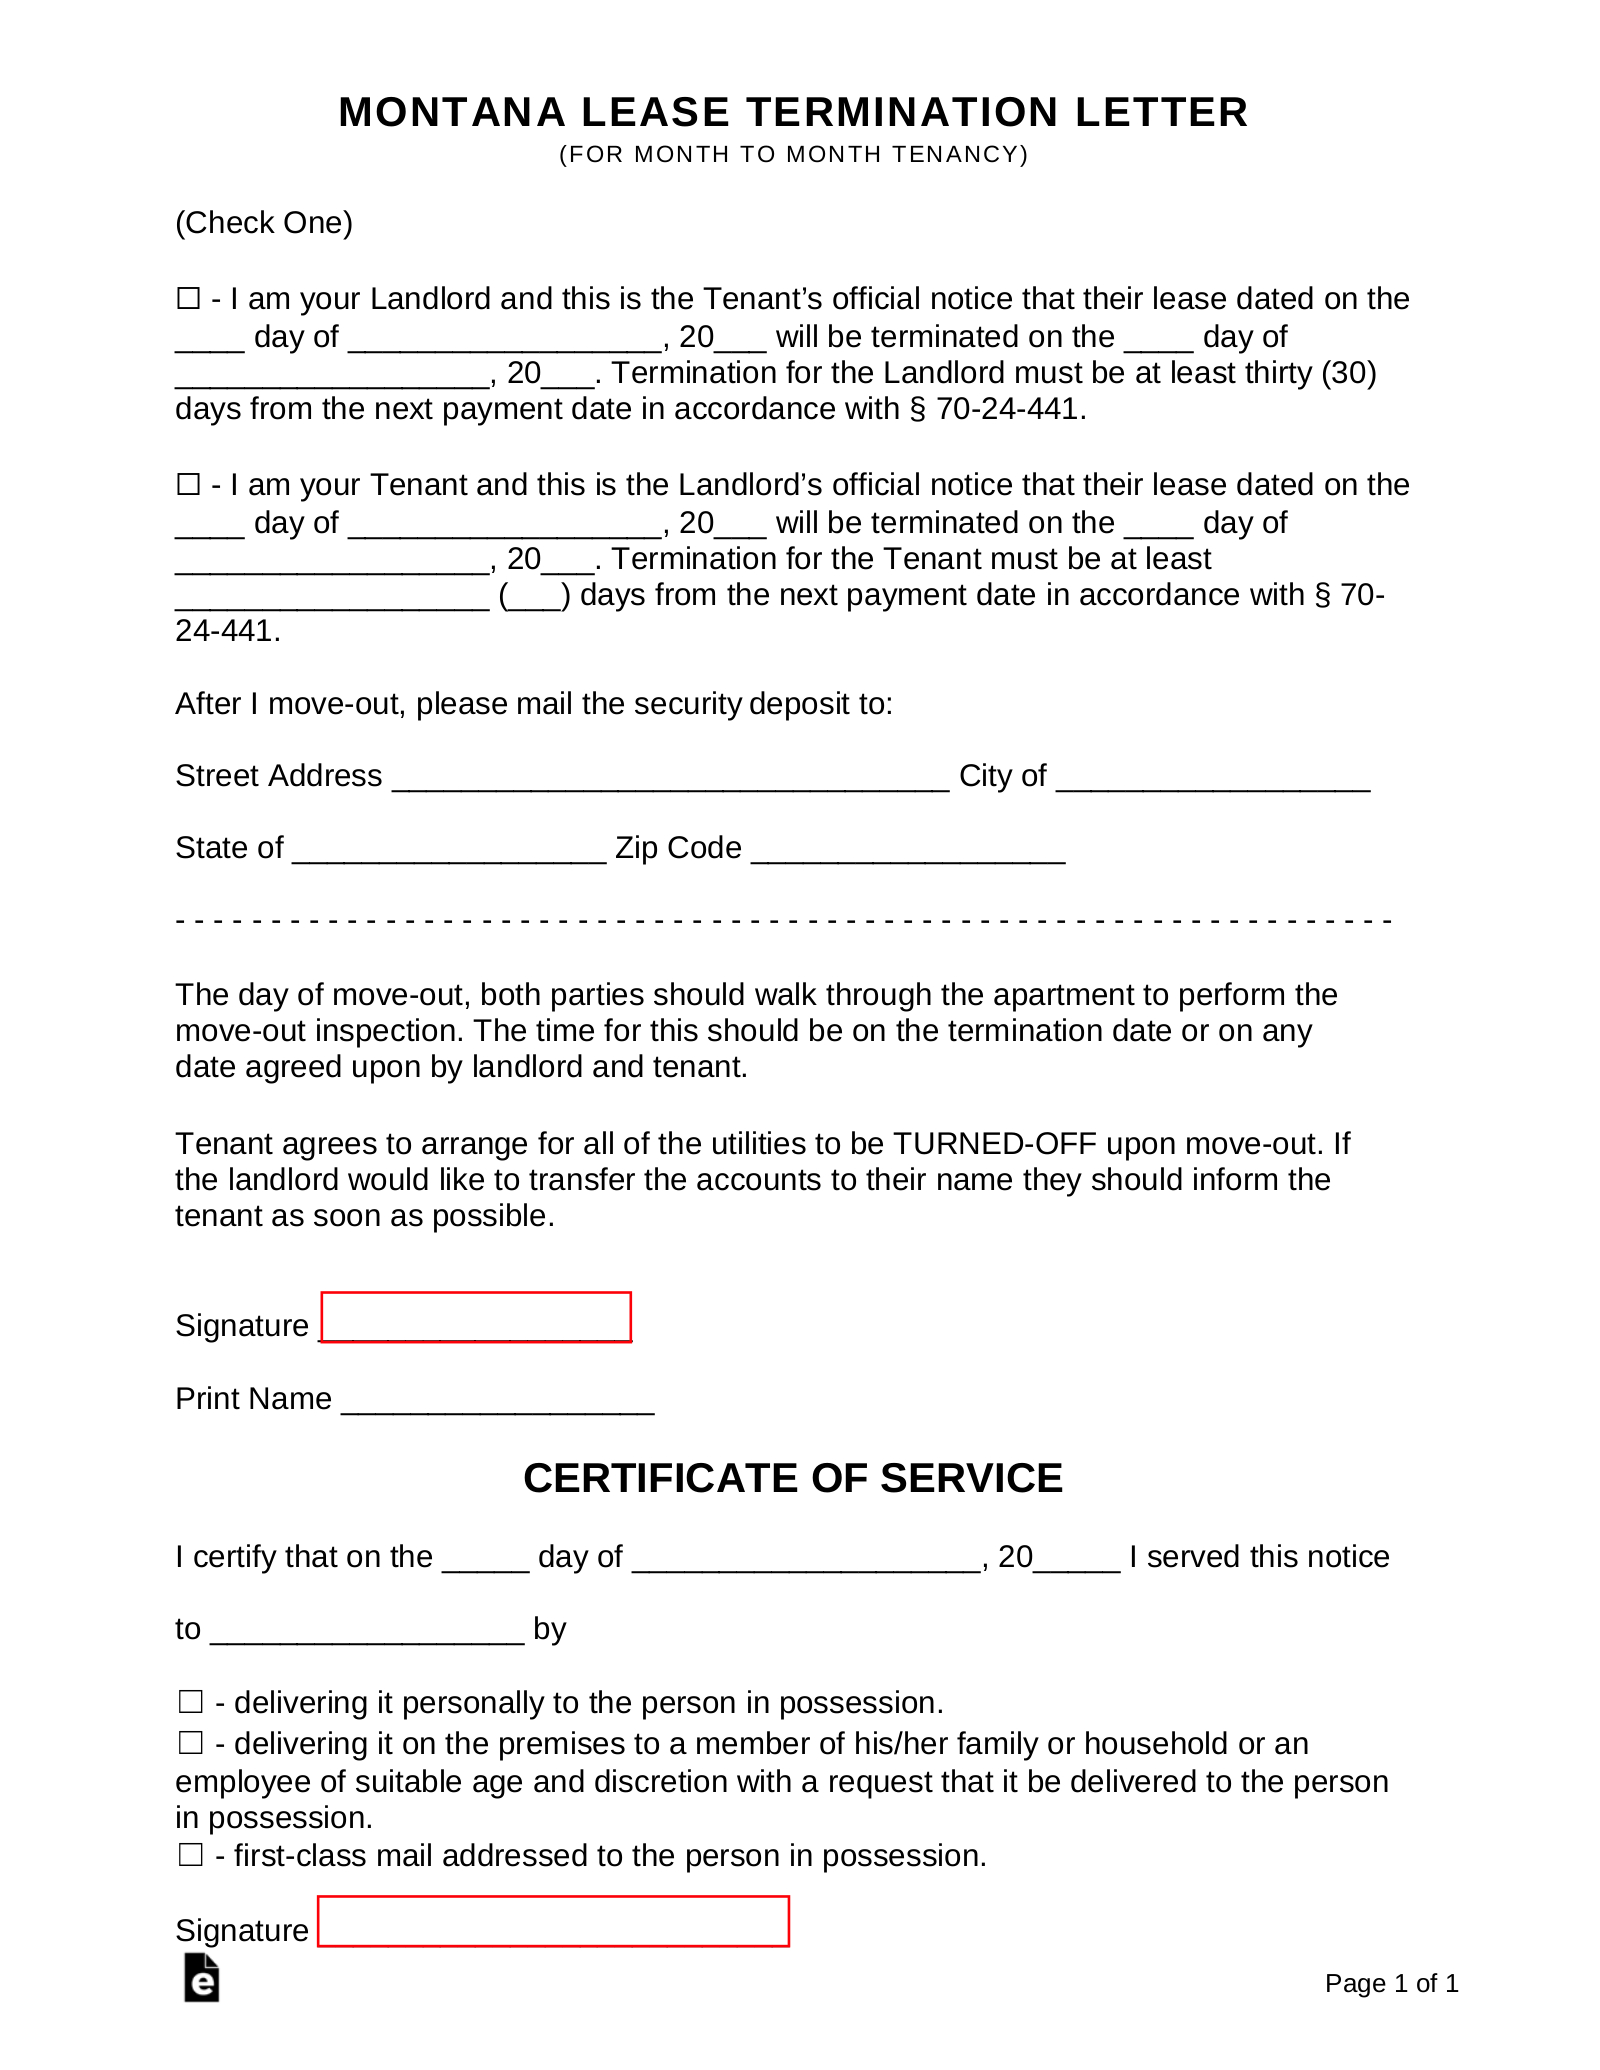 Free Montana Lease Termination Letter | 30-Day Notice - Pdf | Word - Eforms throughout Free 30 Day Notice Contract Termination Letter Template